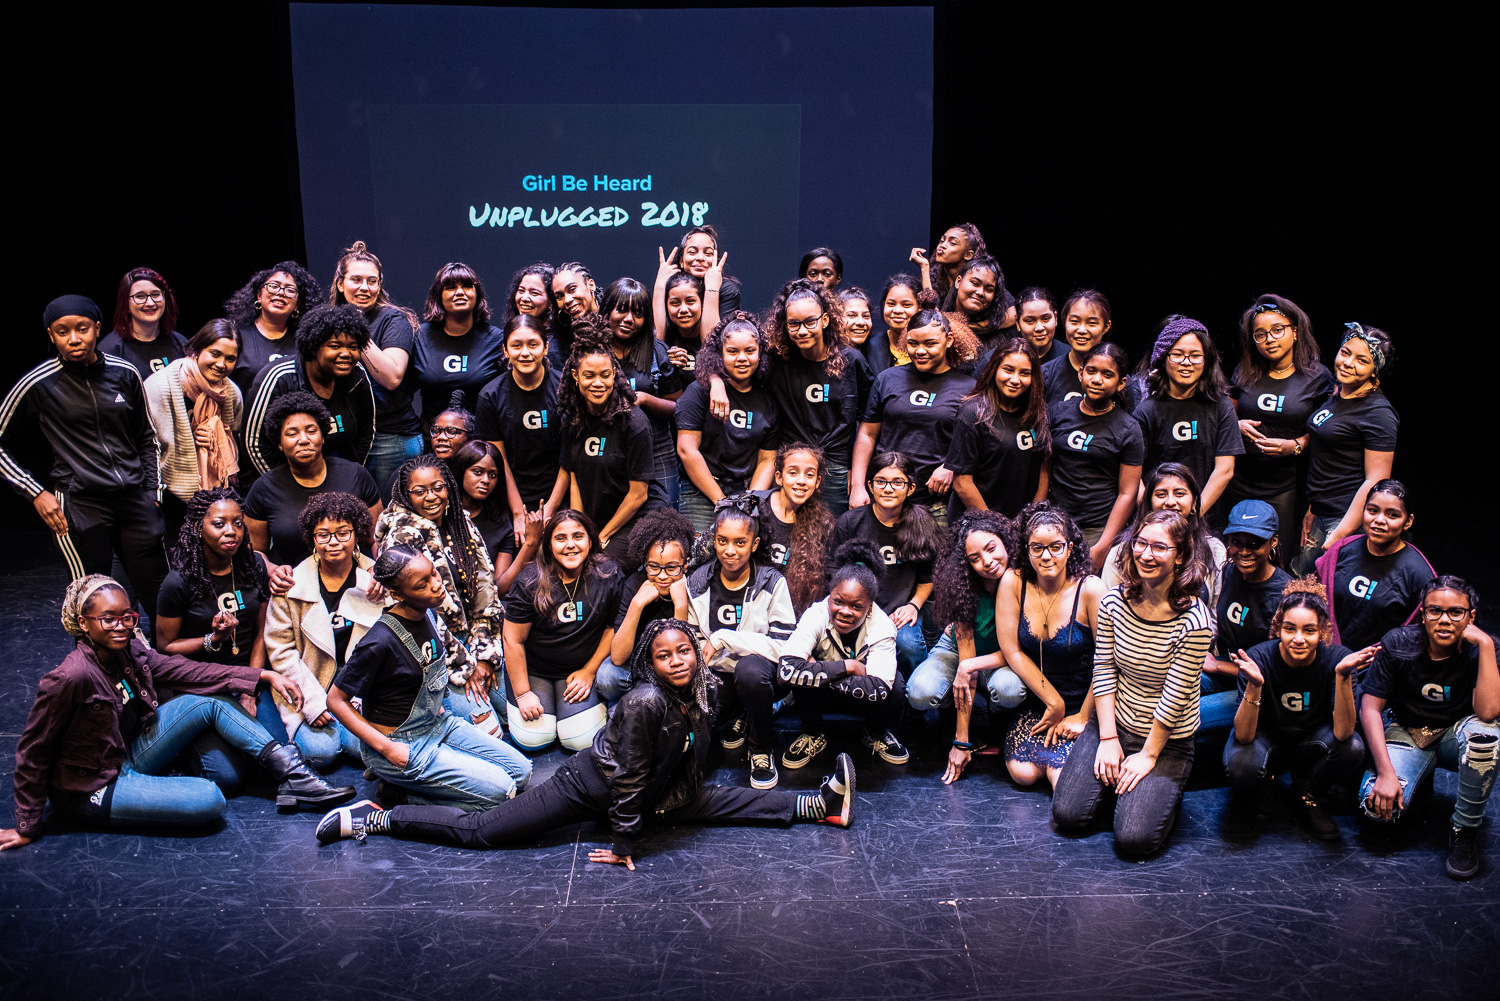 Girl Be Heard performers in the event “Unplugged 2018.” Photo courtesy of Girl Be Heard